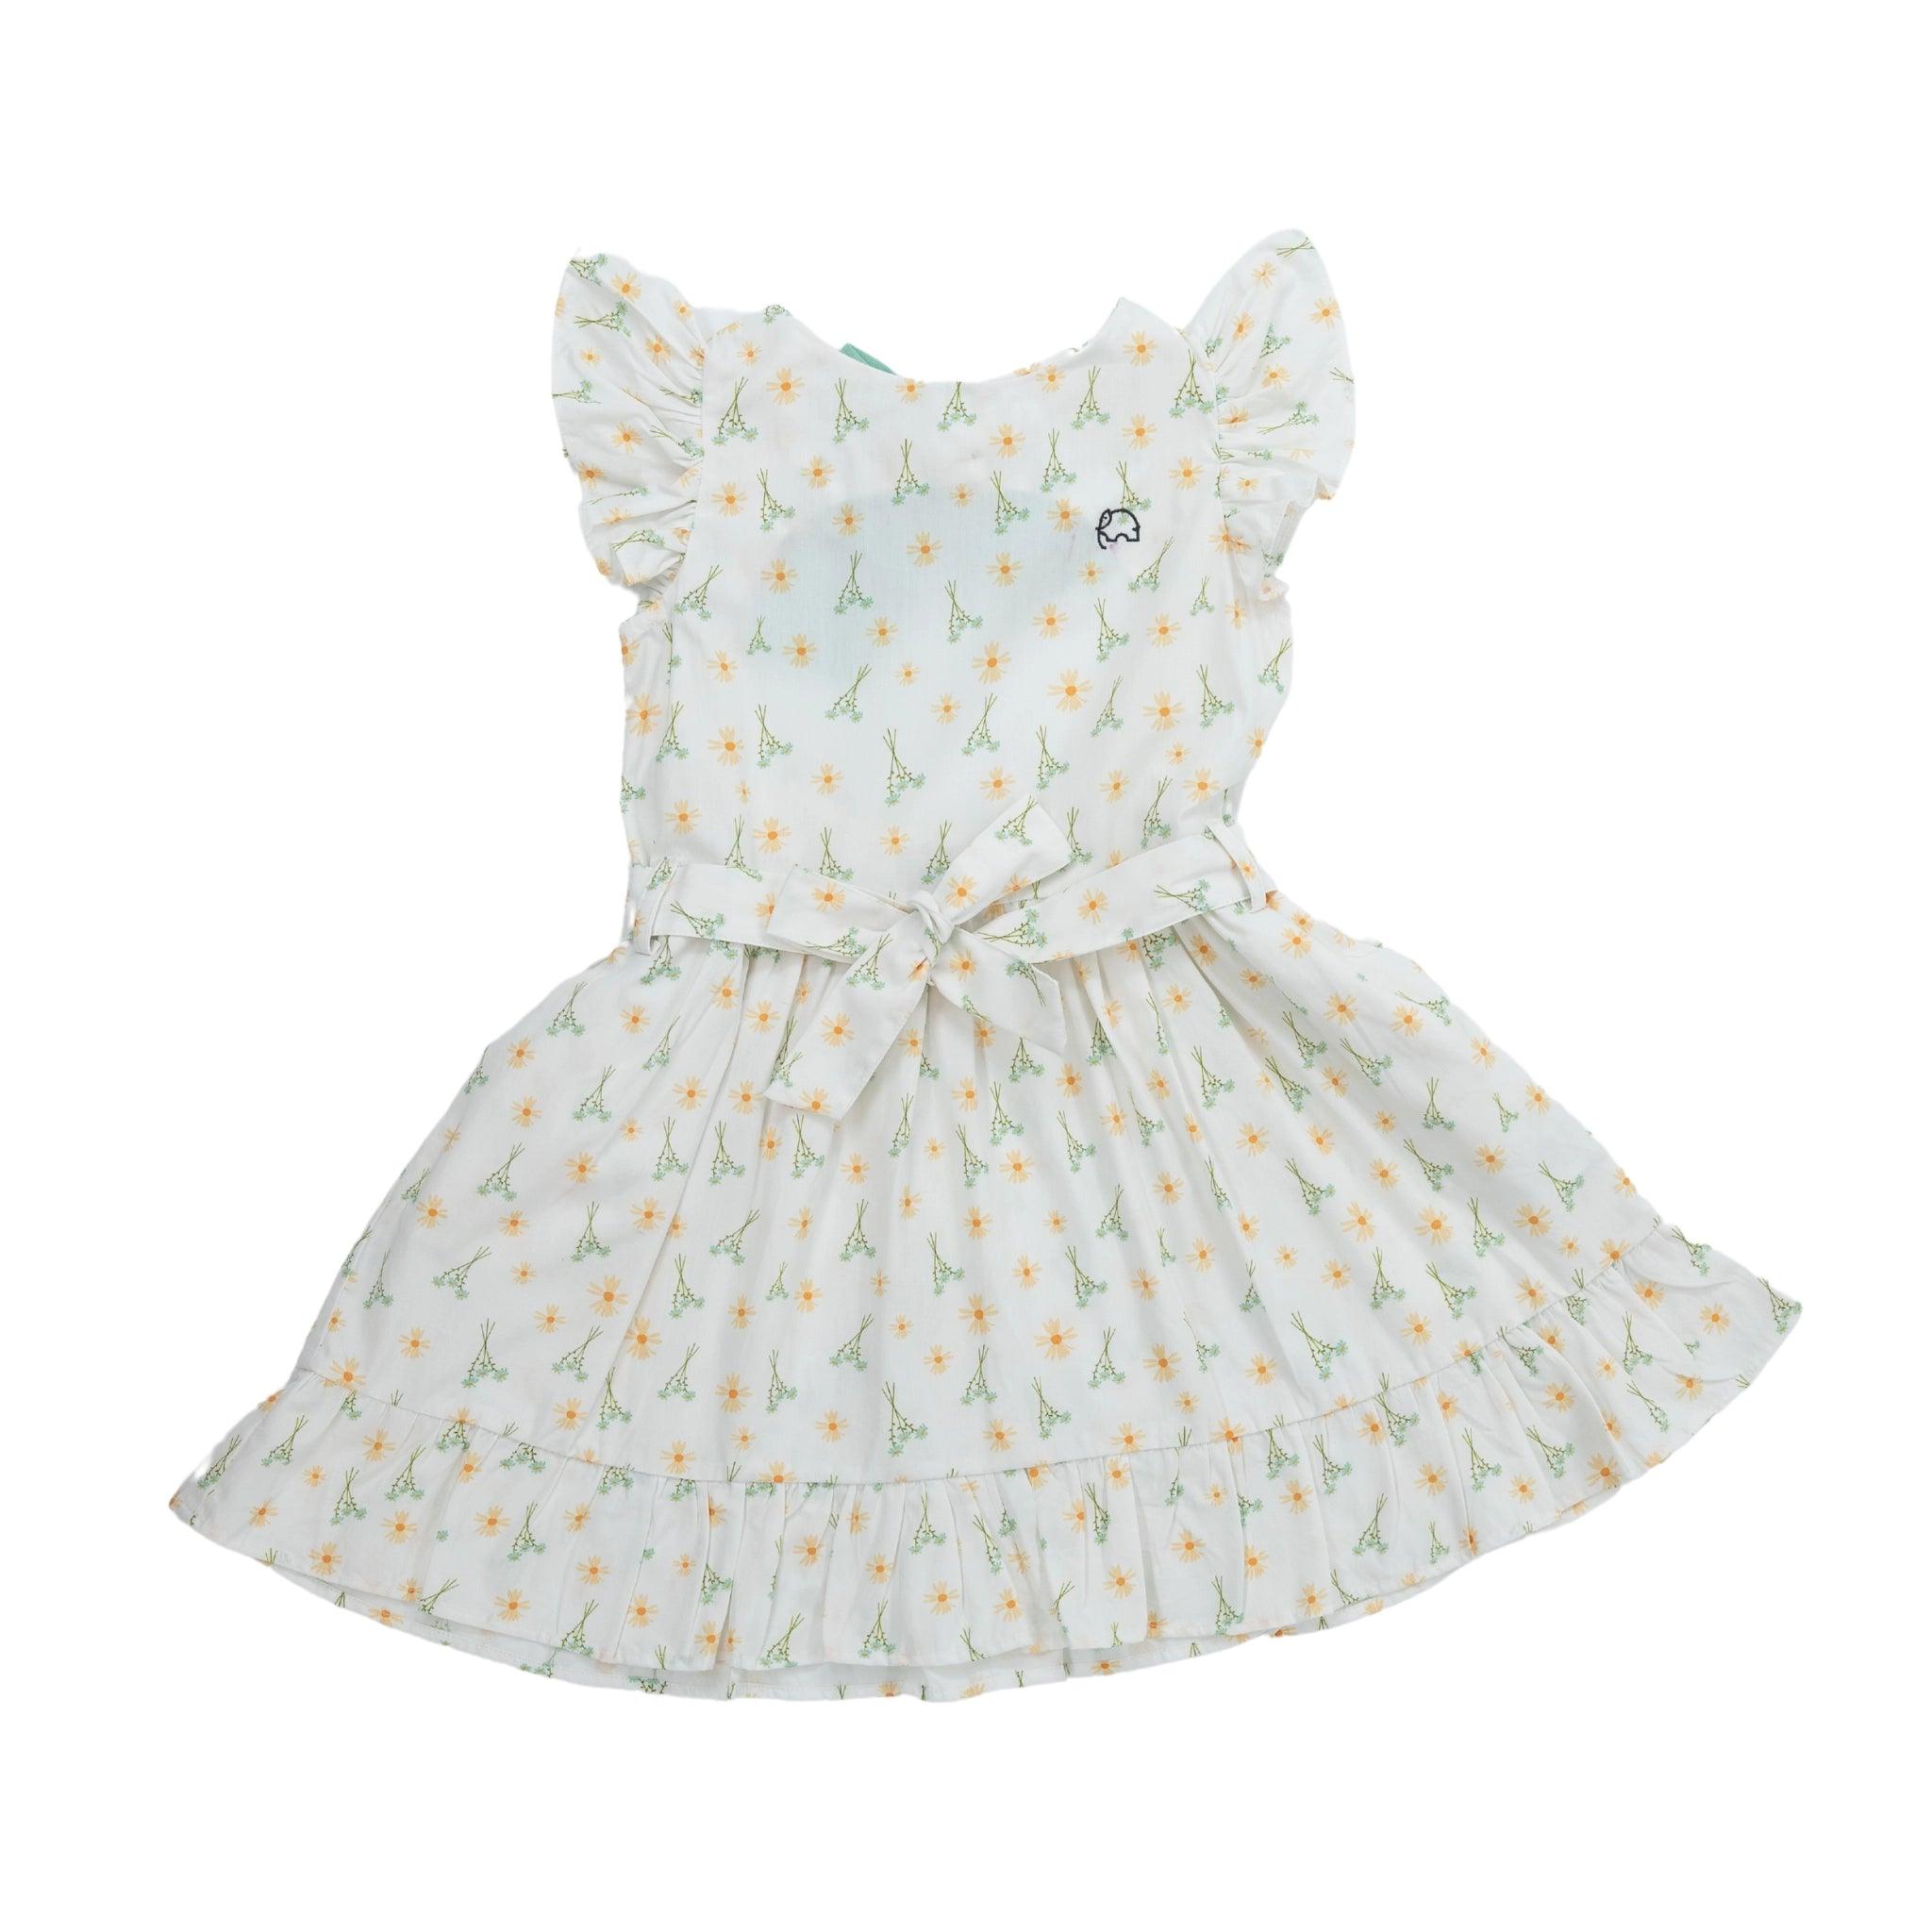 A light gray toddler's dress with a floral and butterfly print, crafted from high-quality cotton, featuring ruffled sleeves and a flared skirt, isolated on a white background. This is the Karee Petite Blossom Cotton Dress in Smoked Pearl.